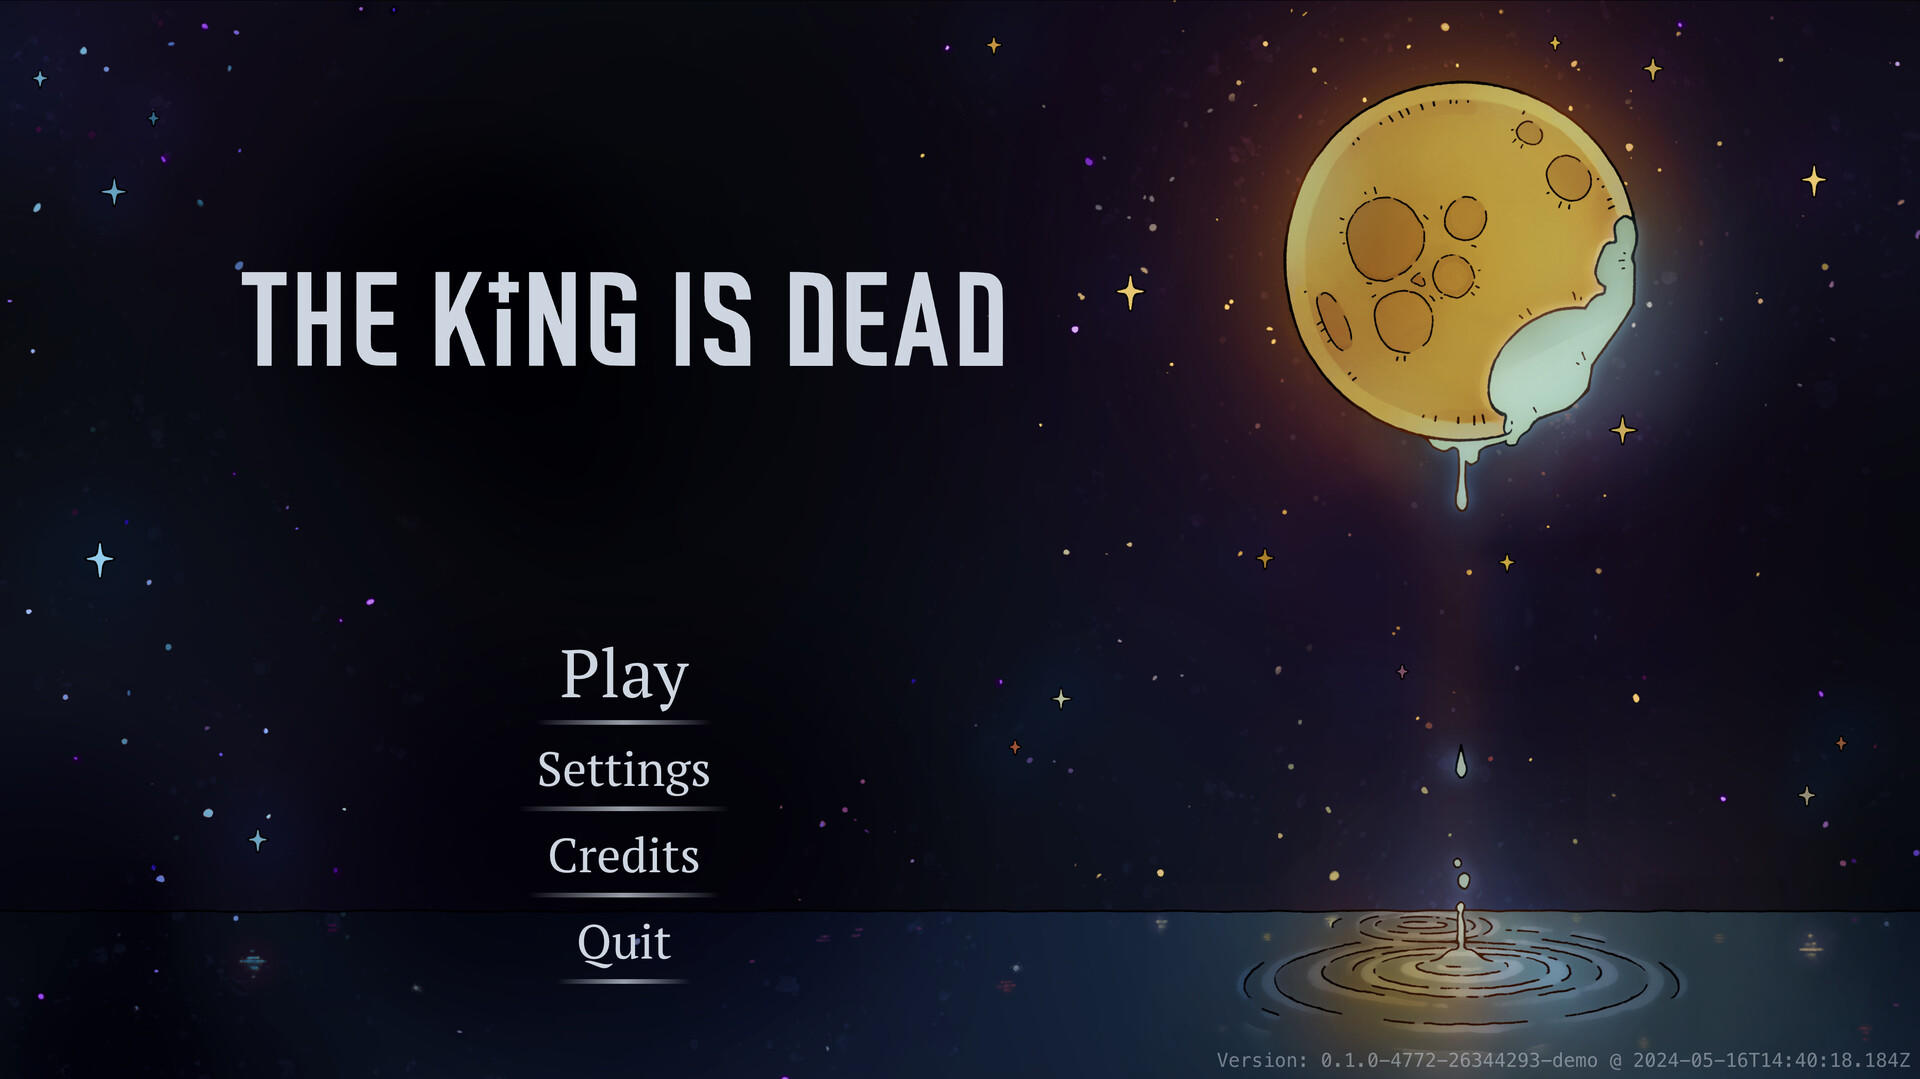 The King is Dead screenshot game